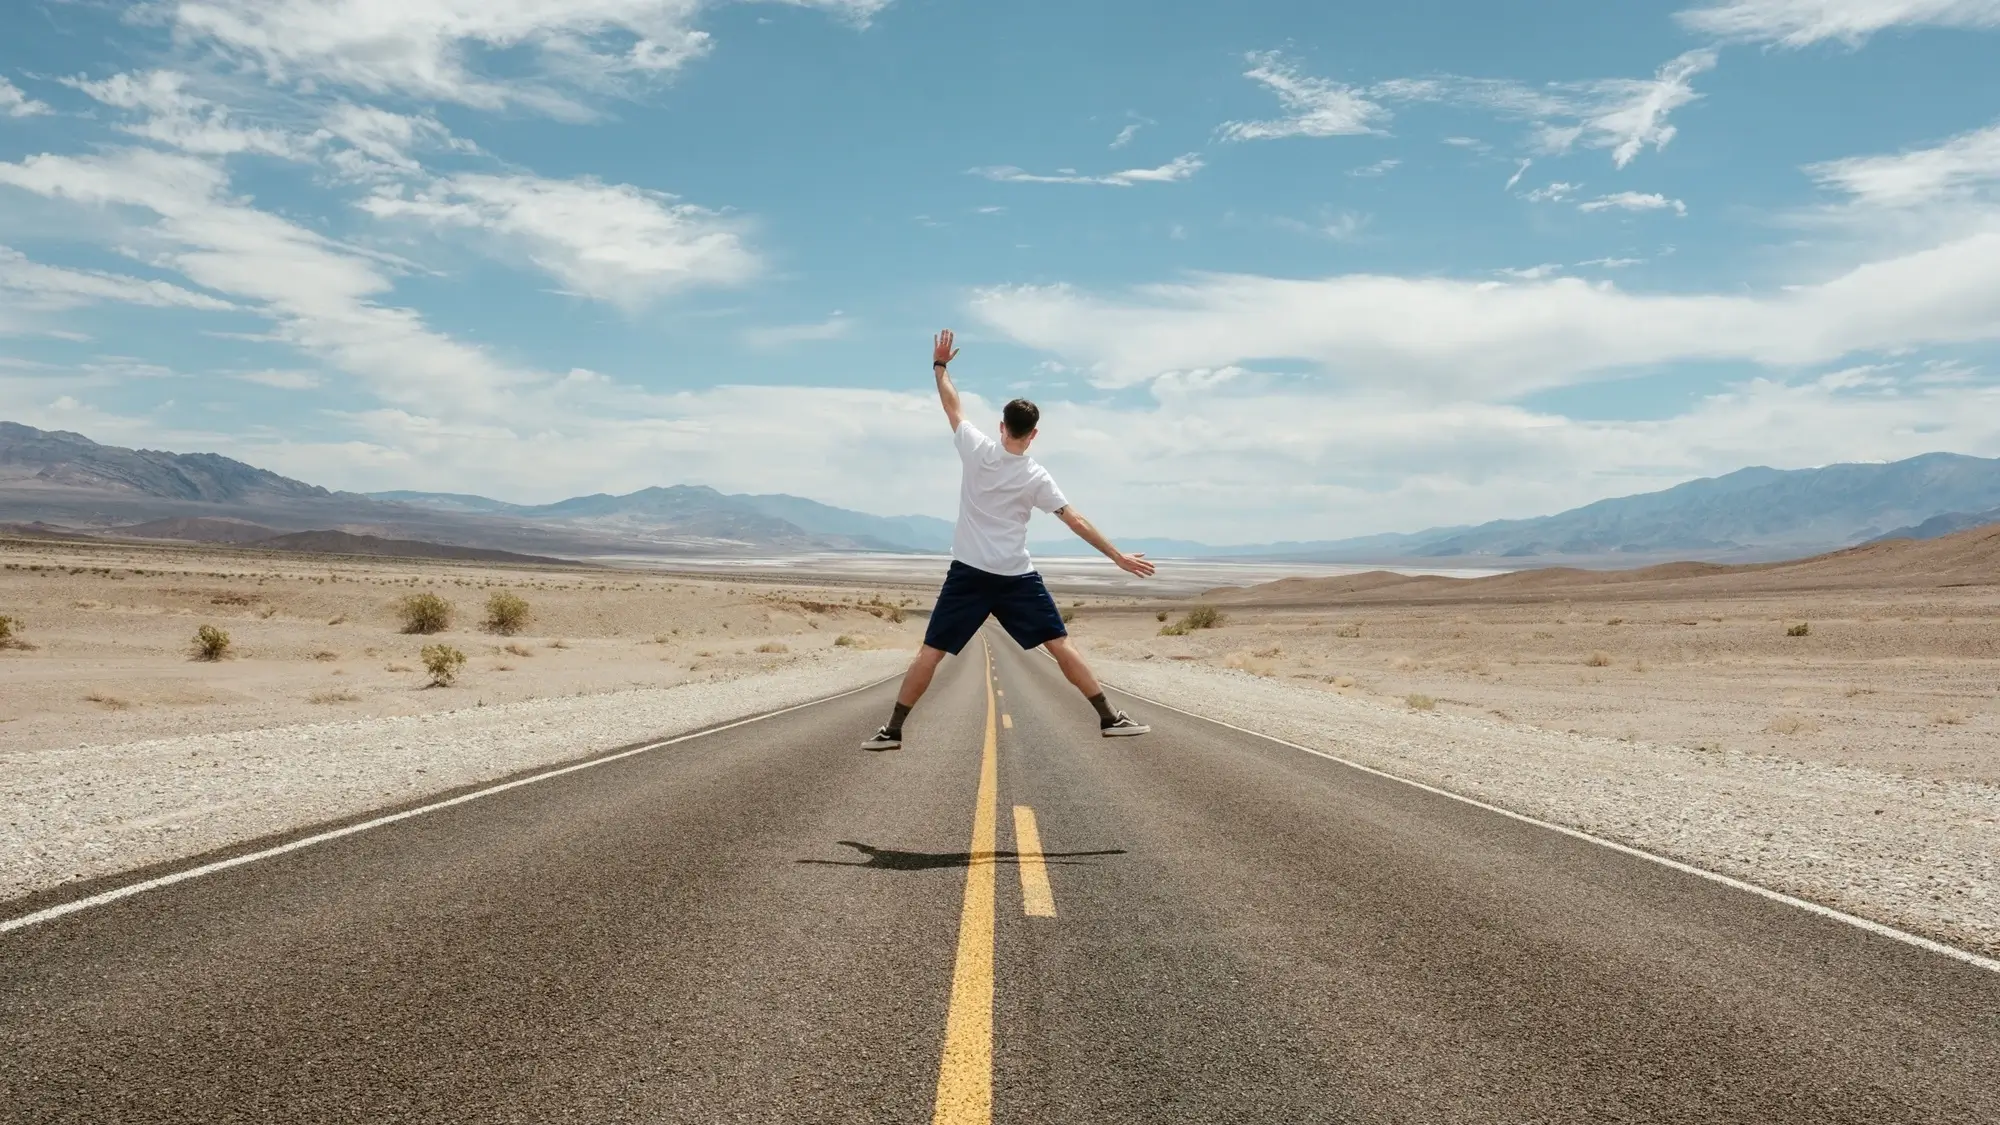 A man doing a jump shot in the middle of a desert road, representing the concept of working holiday maker.